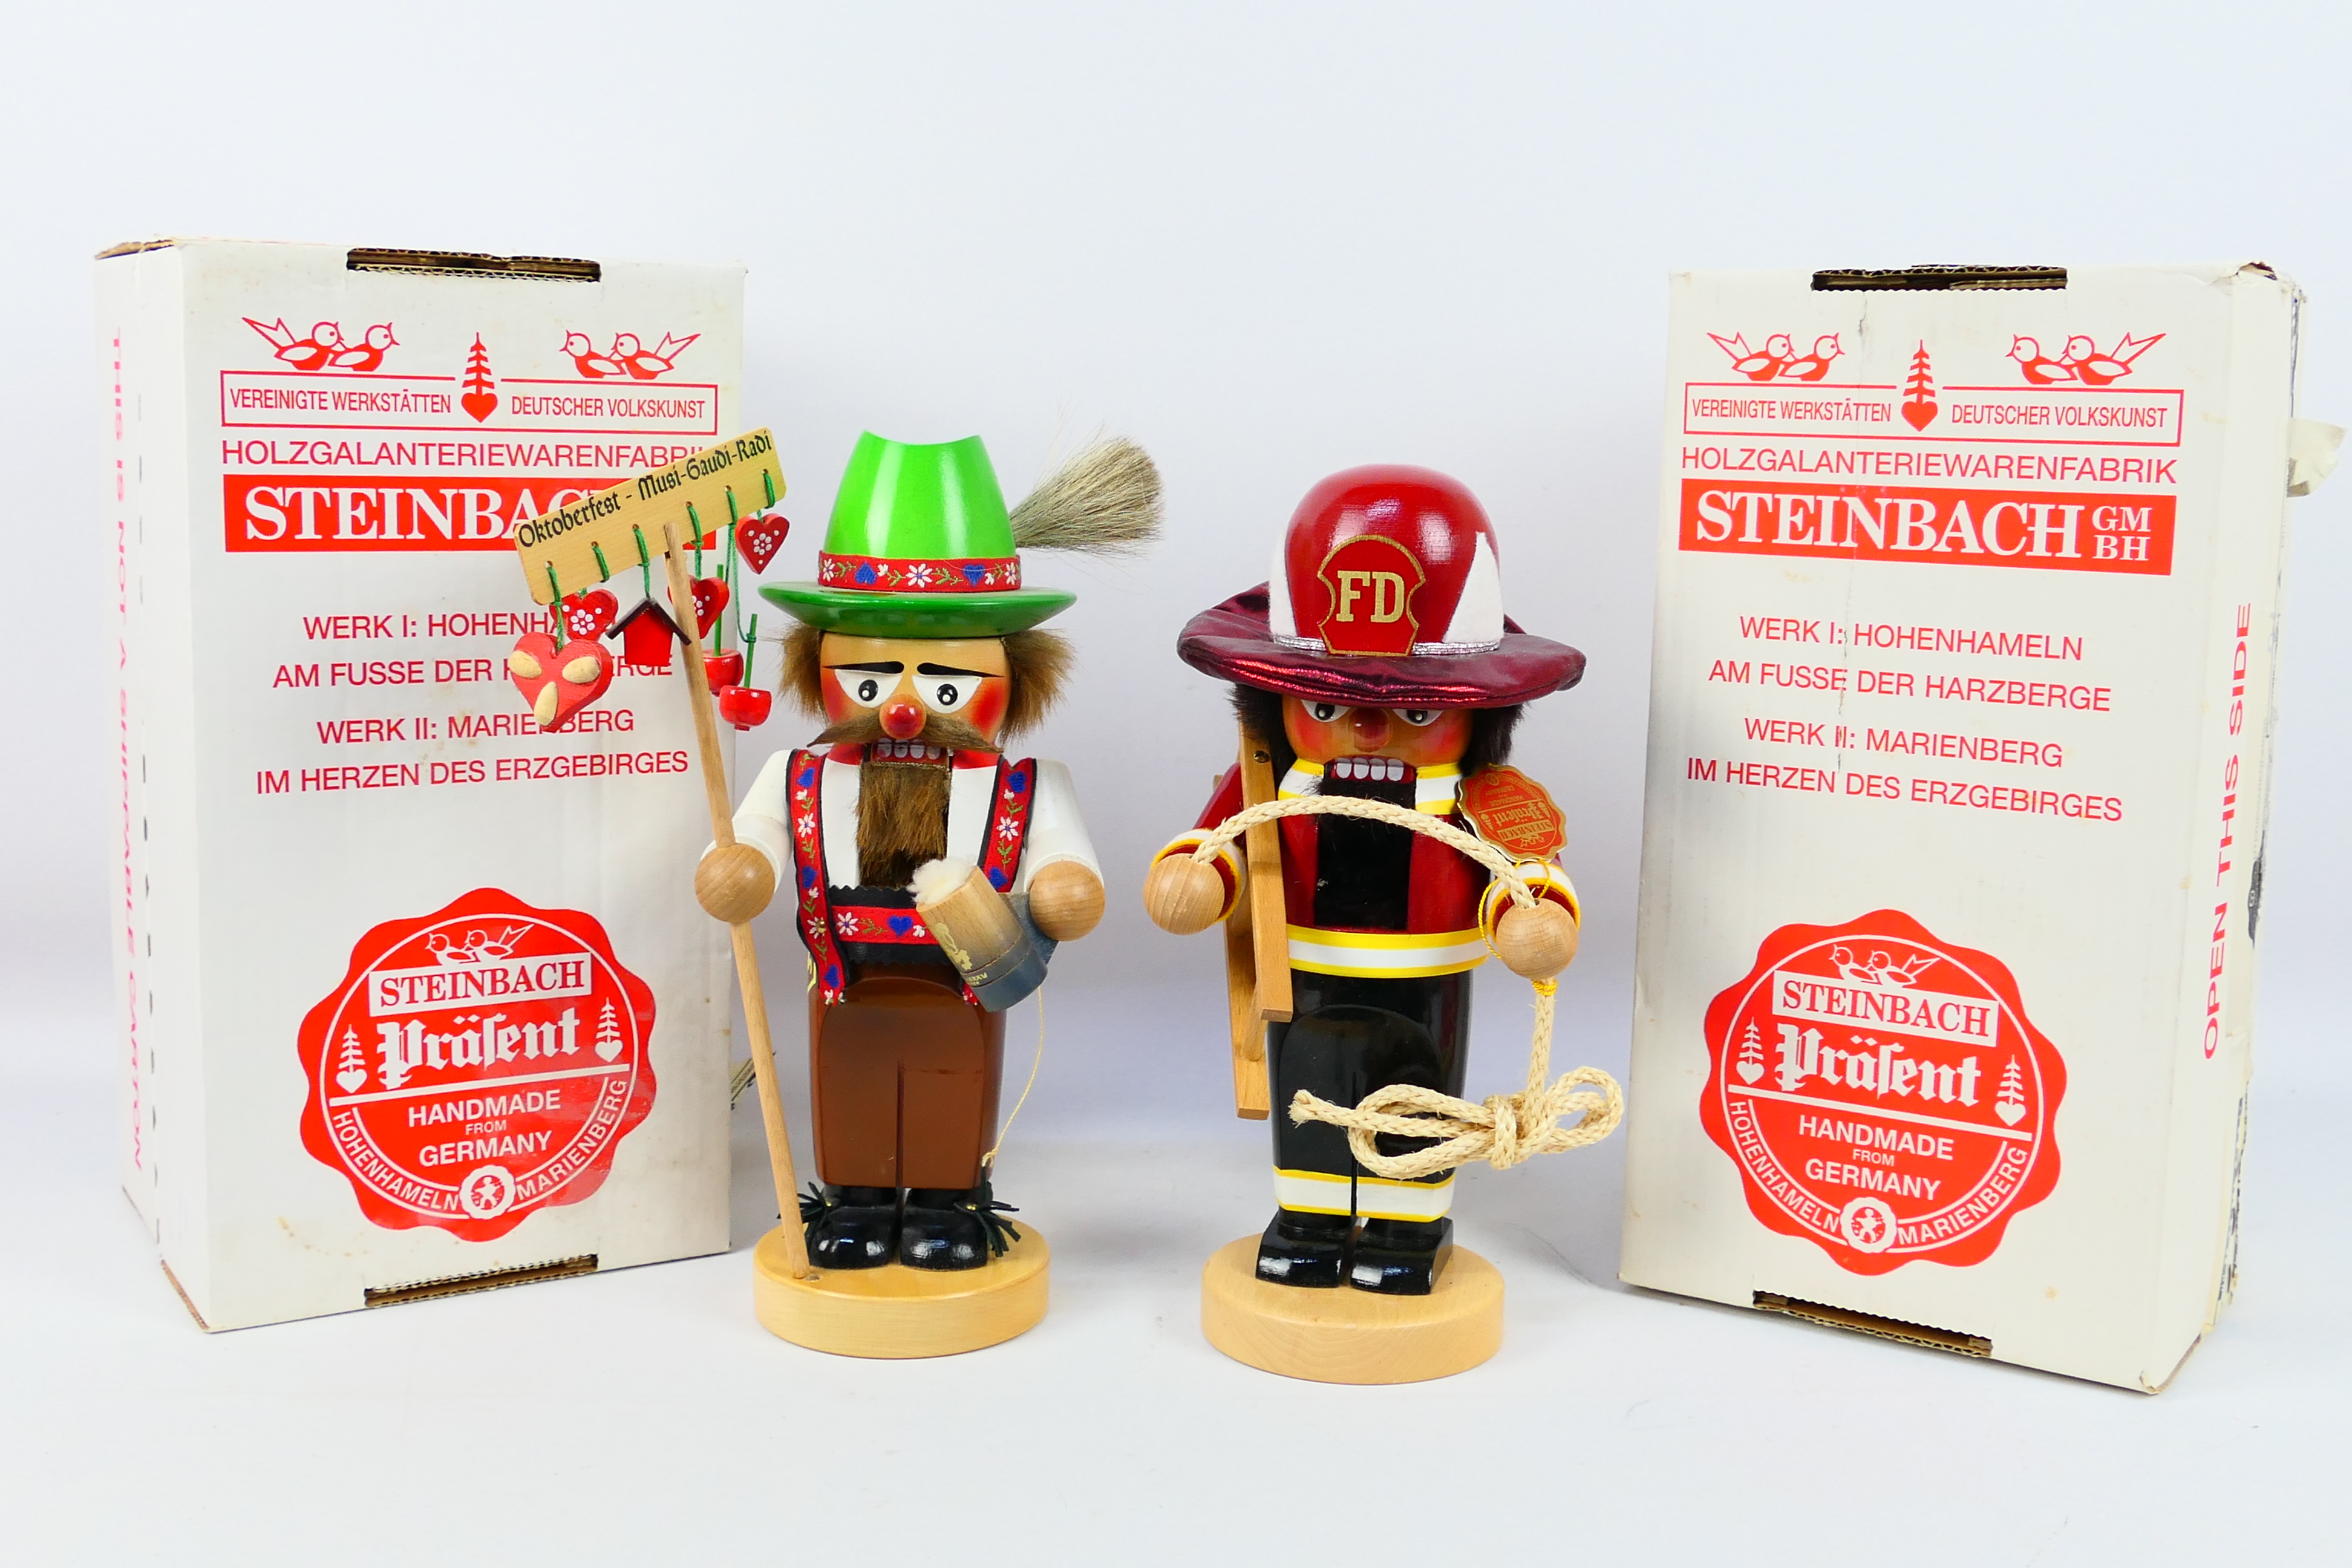 Two traditional German handmade wooden figural nutcrackers by Steinbach,